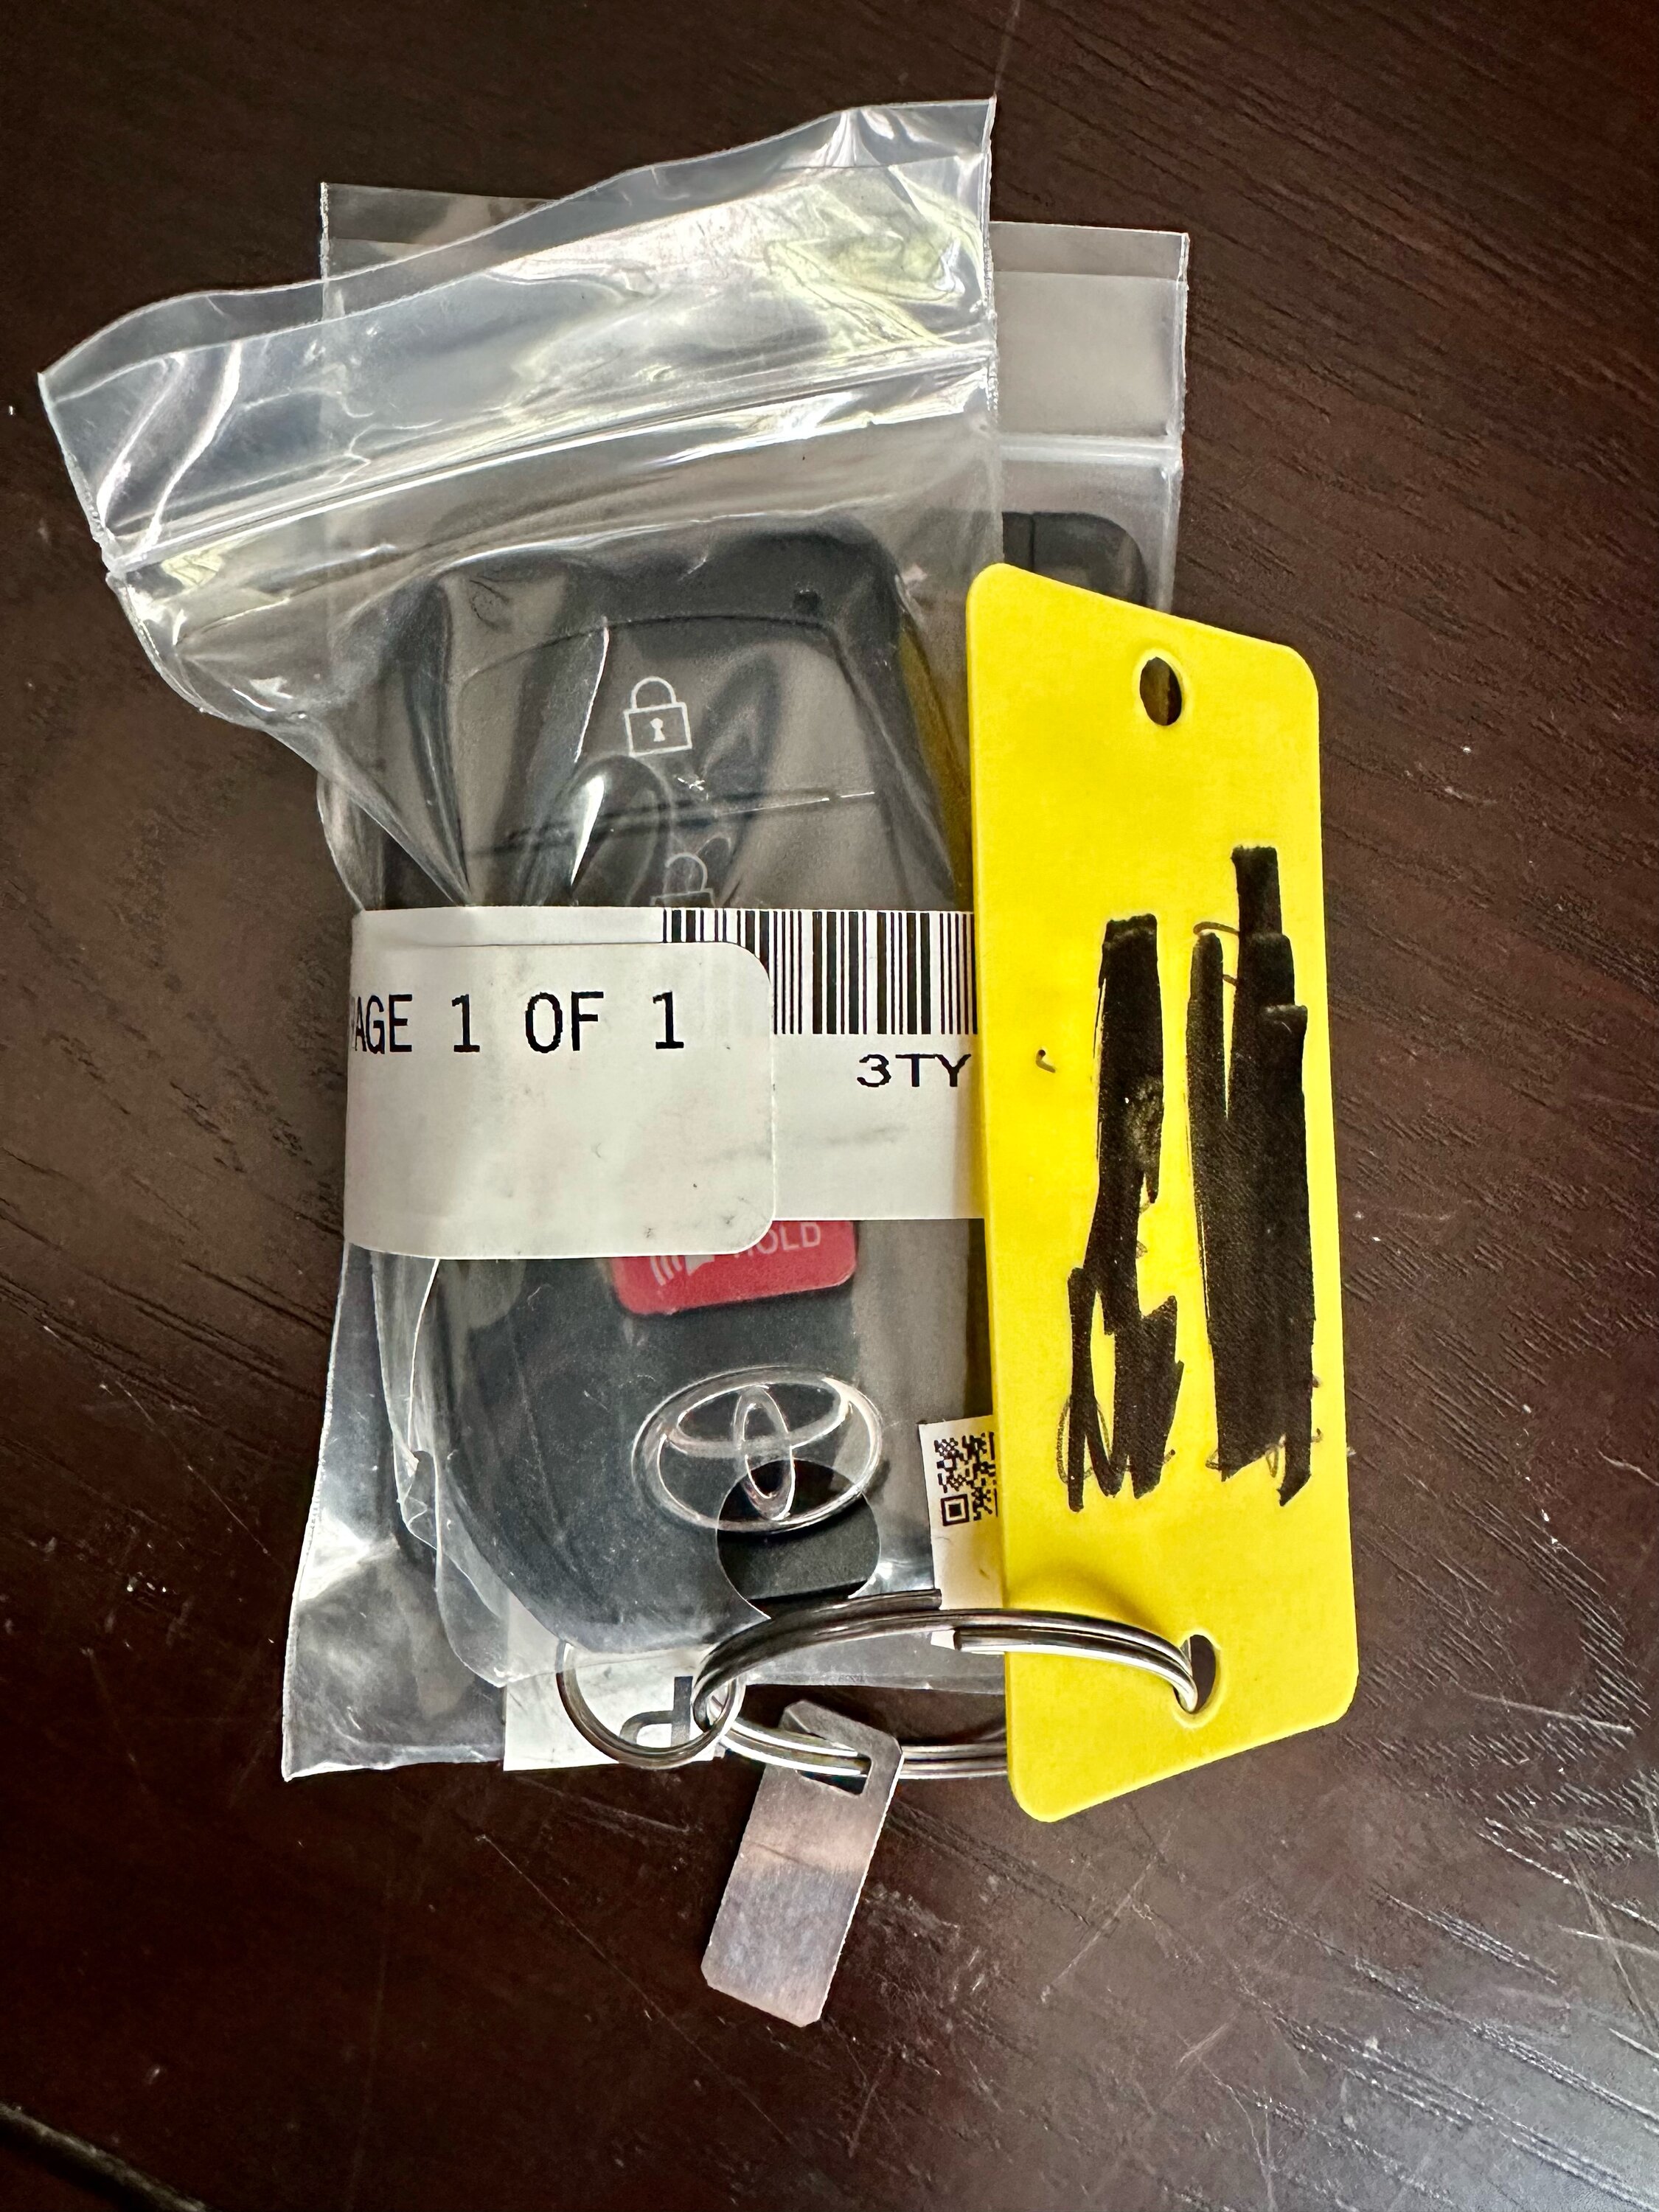 2024 Tacoma Credit Card Key comes with 2024 TRD Off-Road? image0 (1)